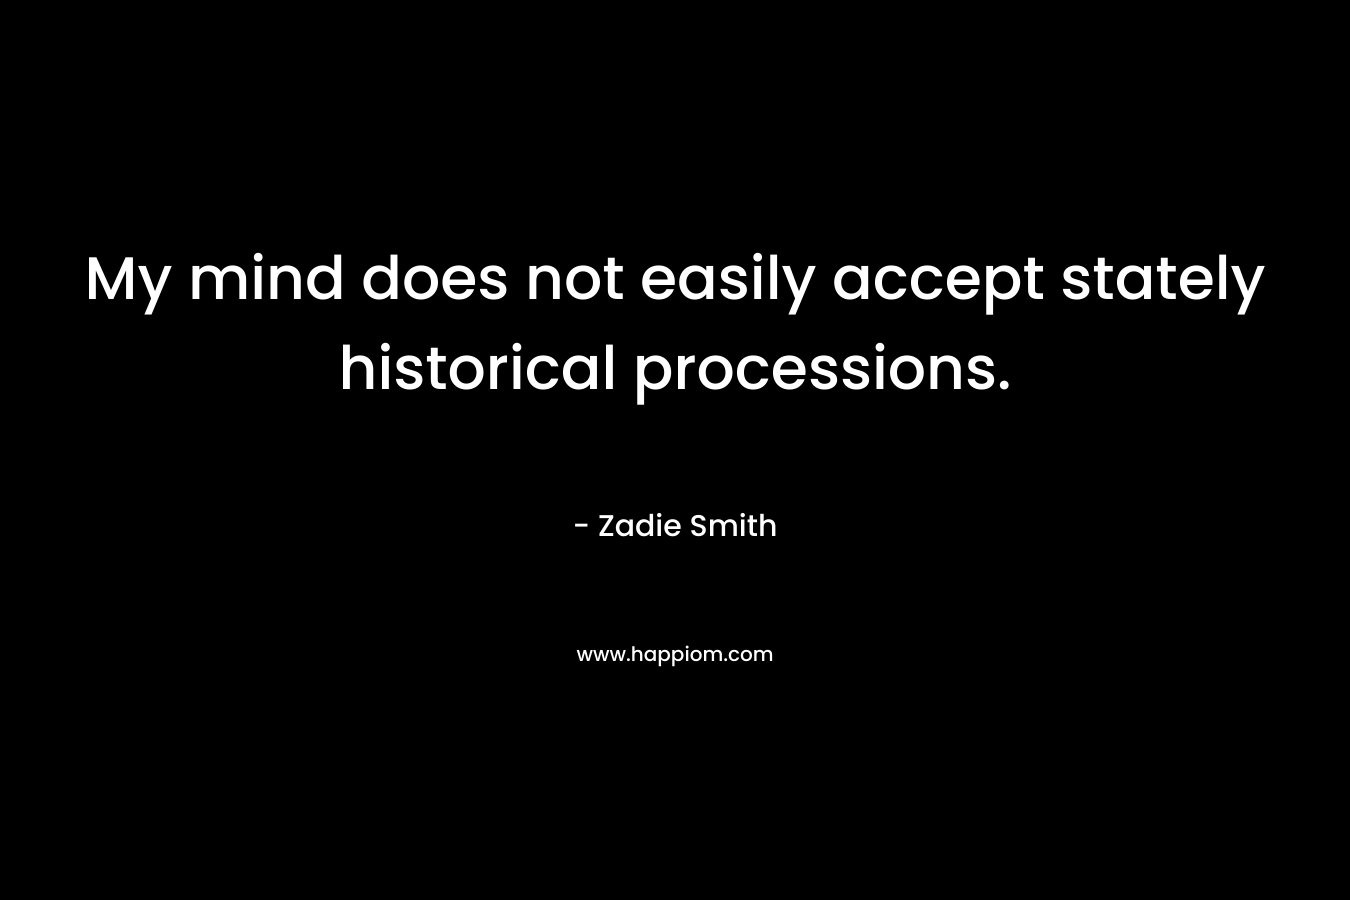 My mind does not easily accept stately historical processions.